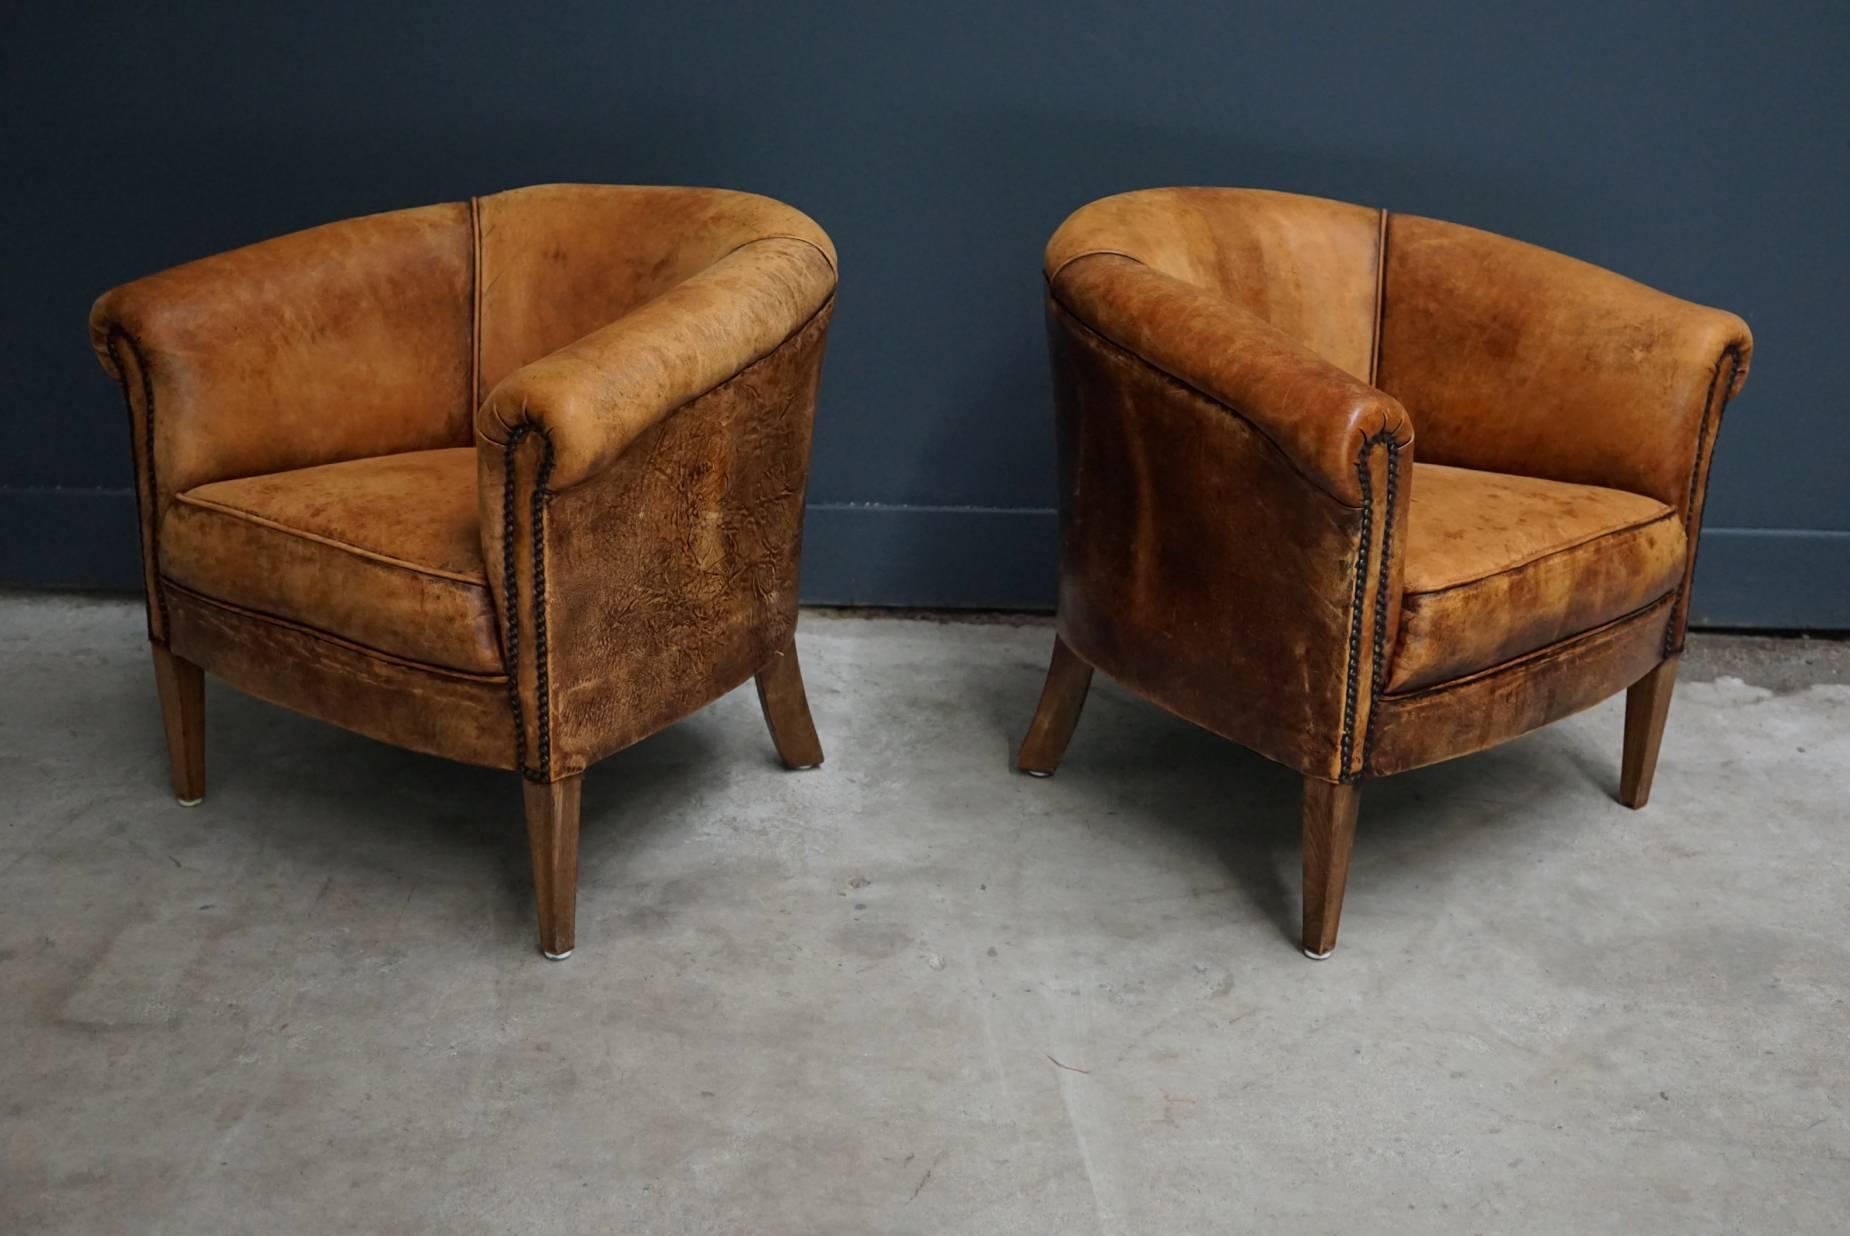 20th Century Vintage Dutch Cognac Leather Club Chairs, Set of Two